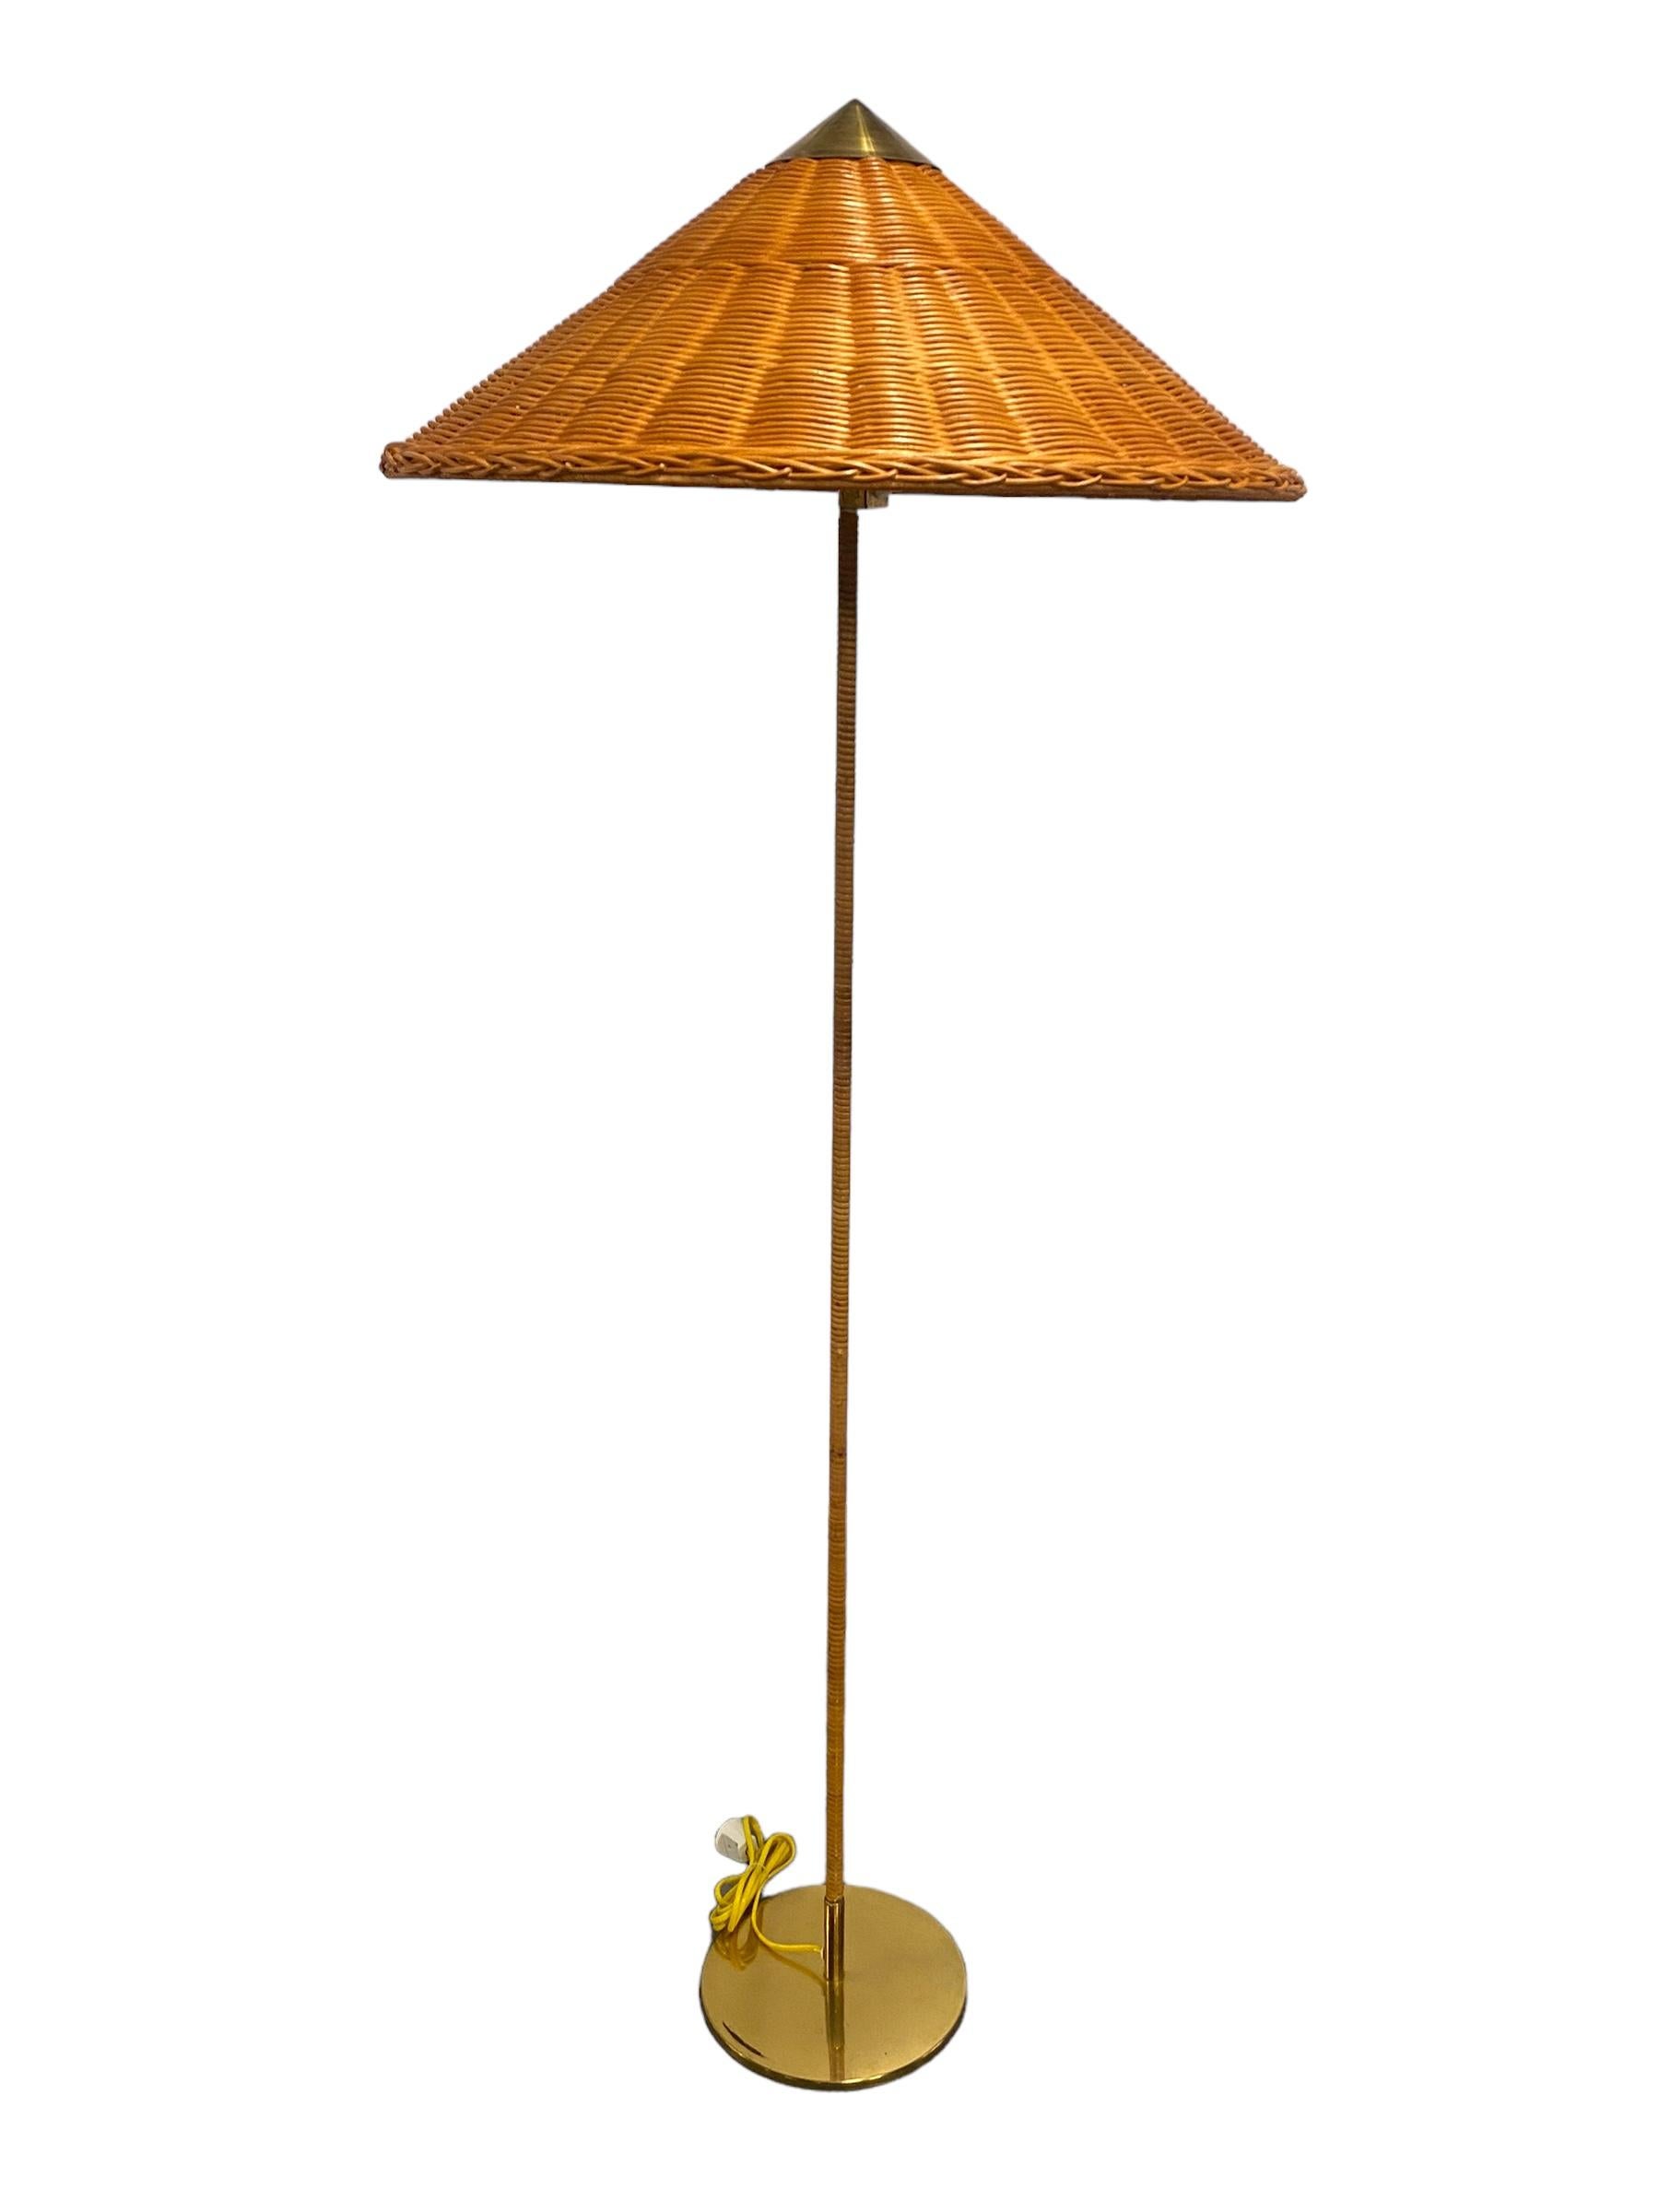 This iconic floor lamp was originally designed by Paavo Tynell in the late 1930s and has been refined during the golden era of the Tynell design in the second half of the 1940s. This exquisite lamp still retains all of the original parts except for